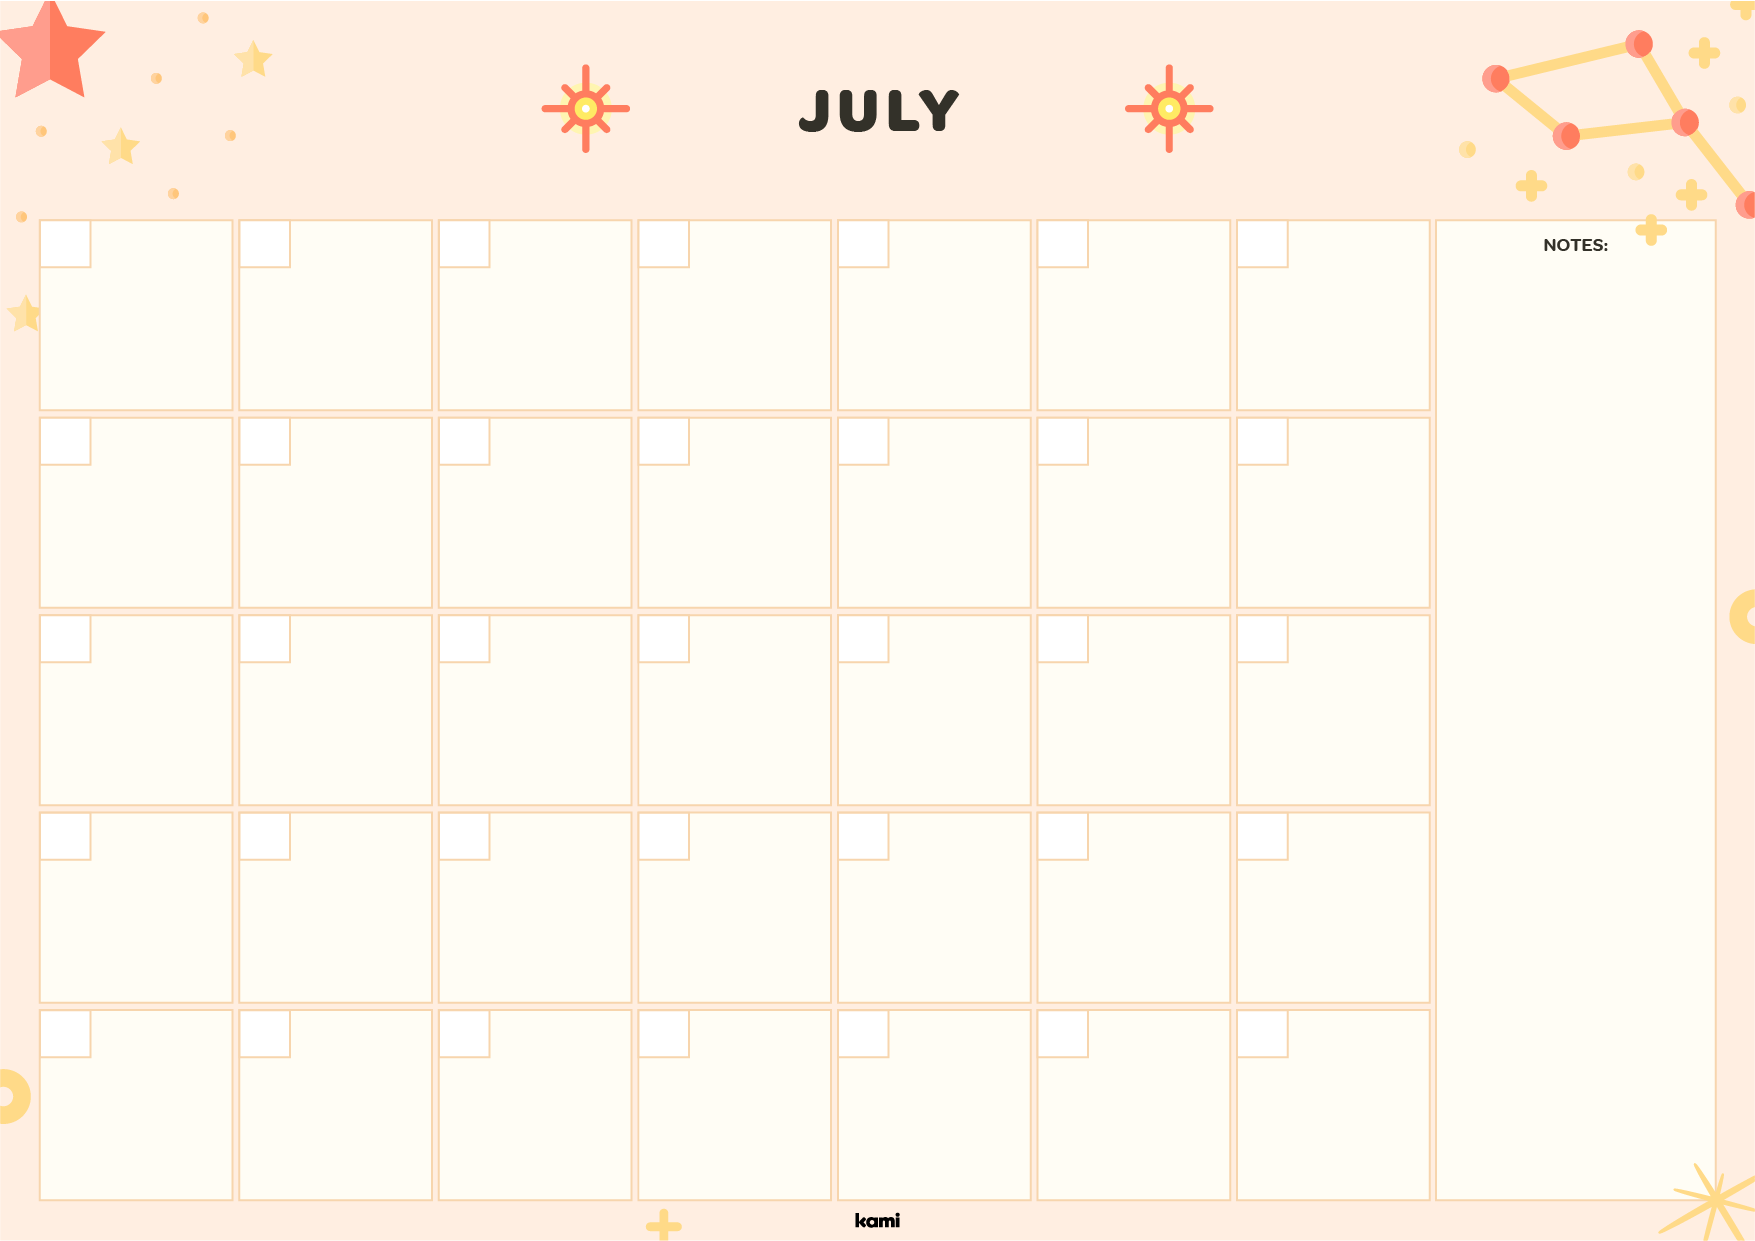 A calendar pack for back to school with a stars design.